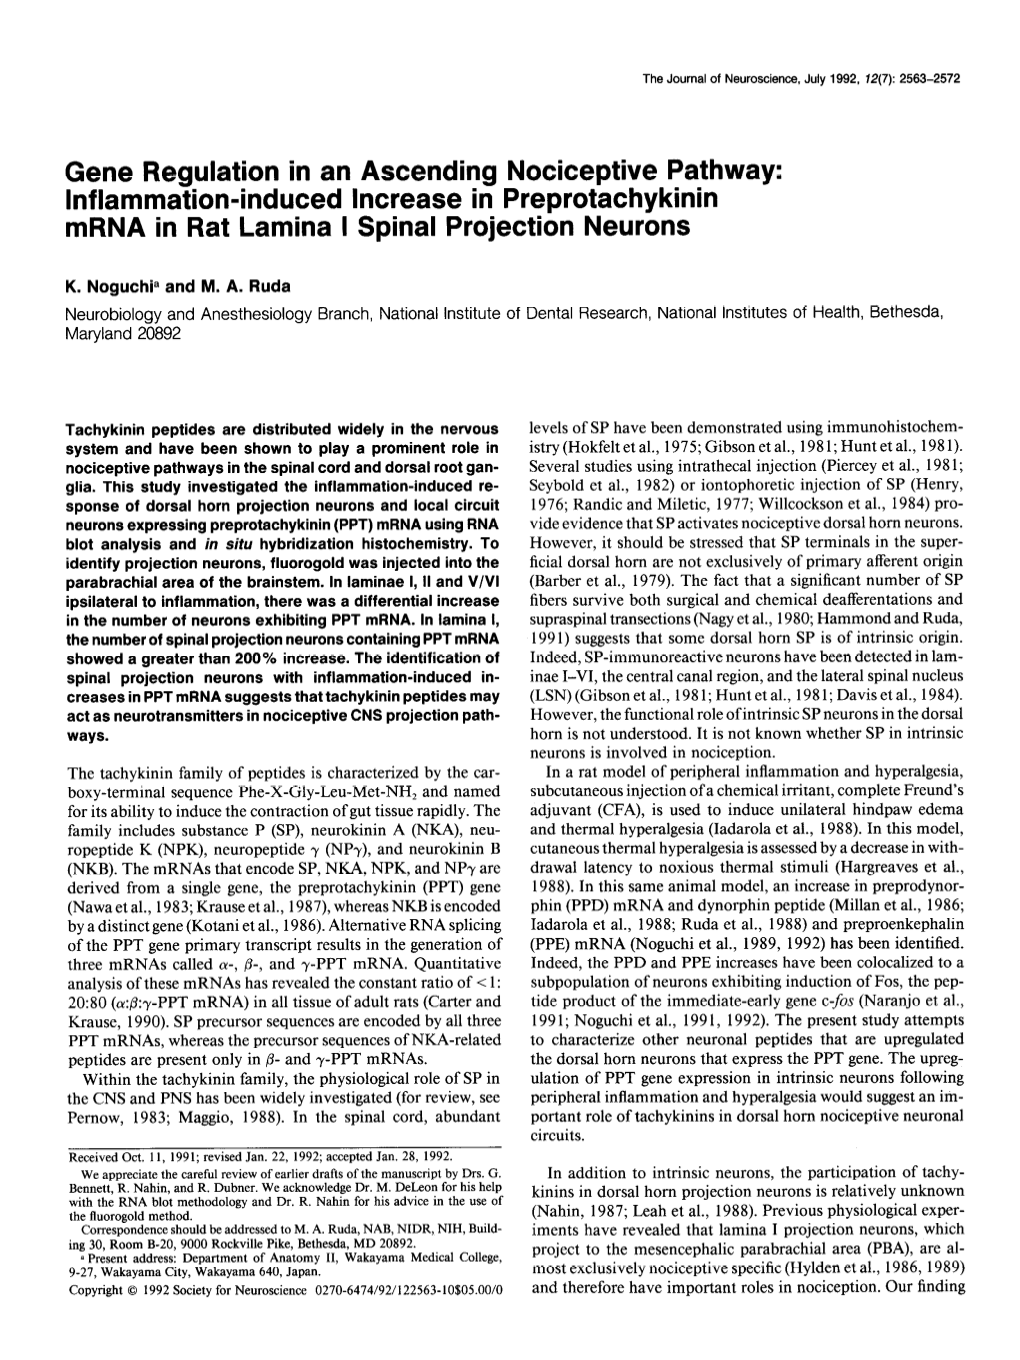 Inflammation-Induced Increase in Preprotachykinin Mrna in Rat Lamina I Spinal Projection Neurons